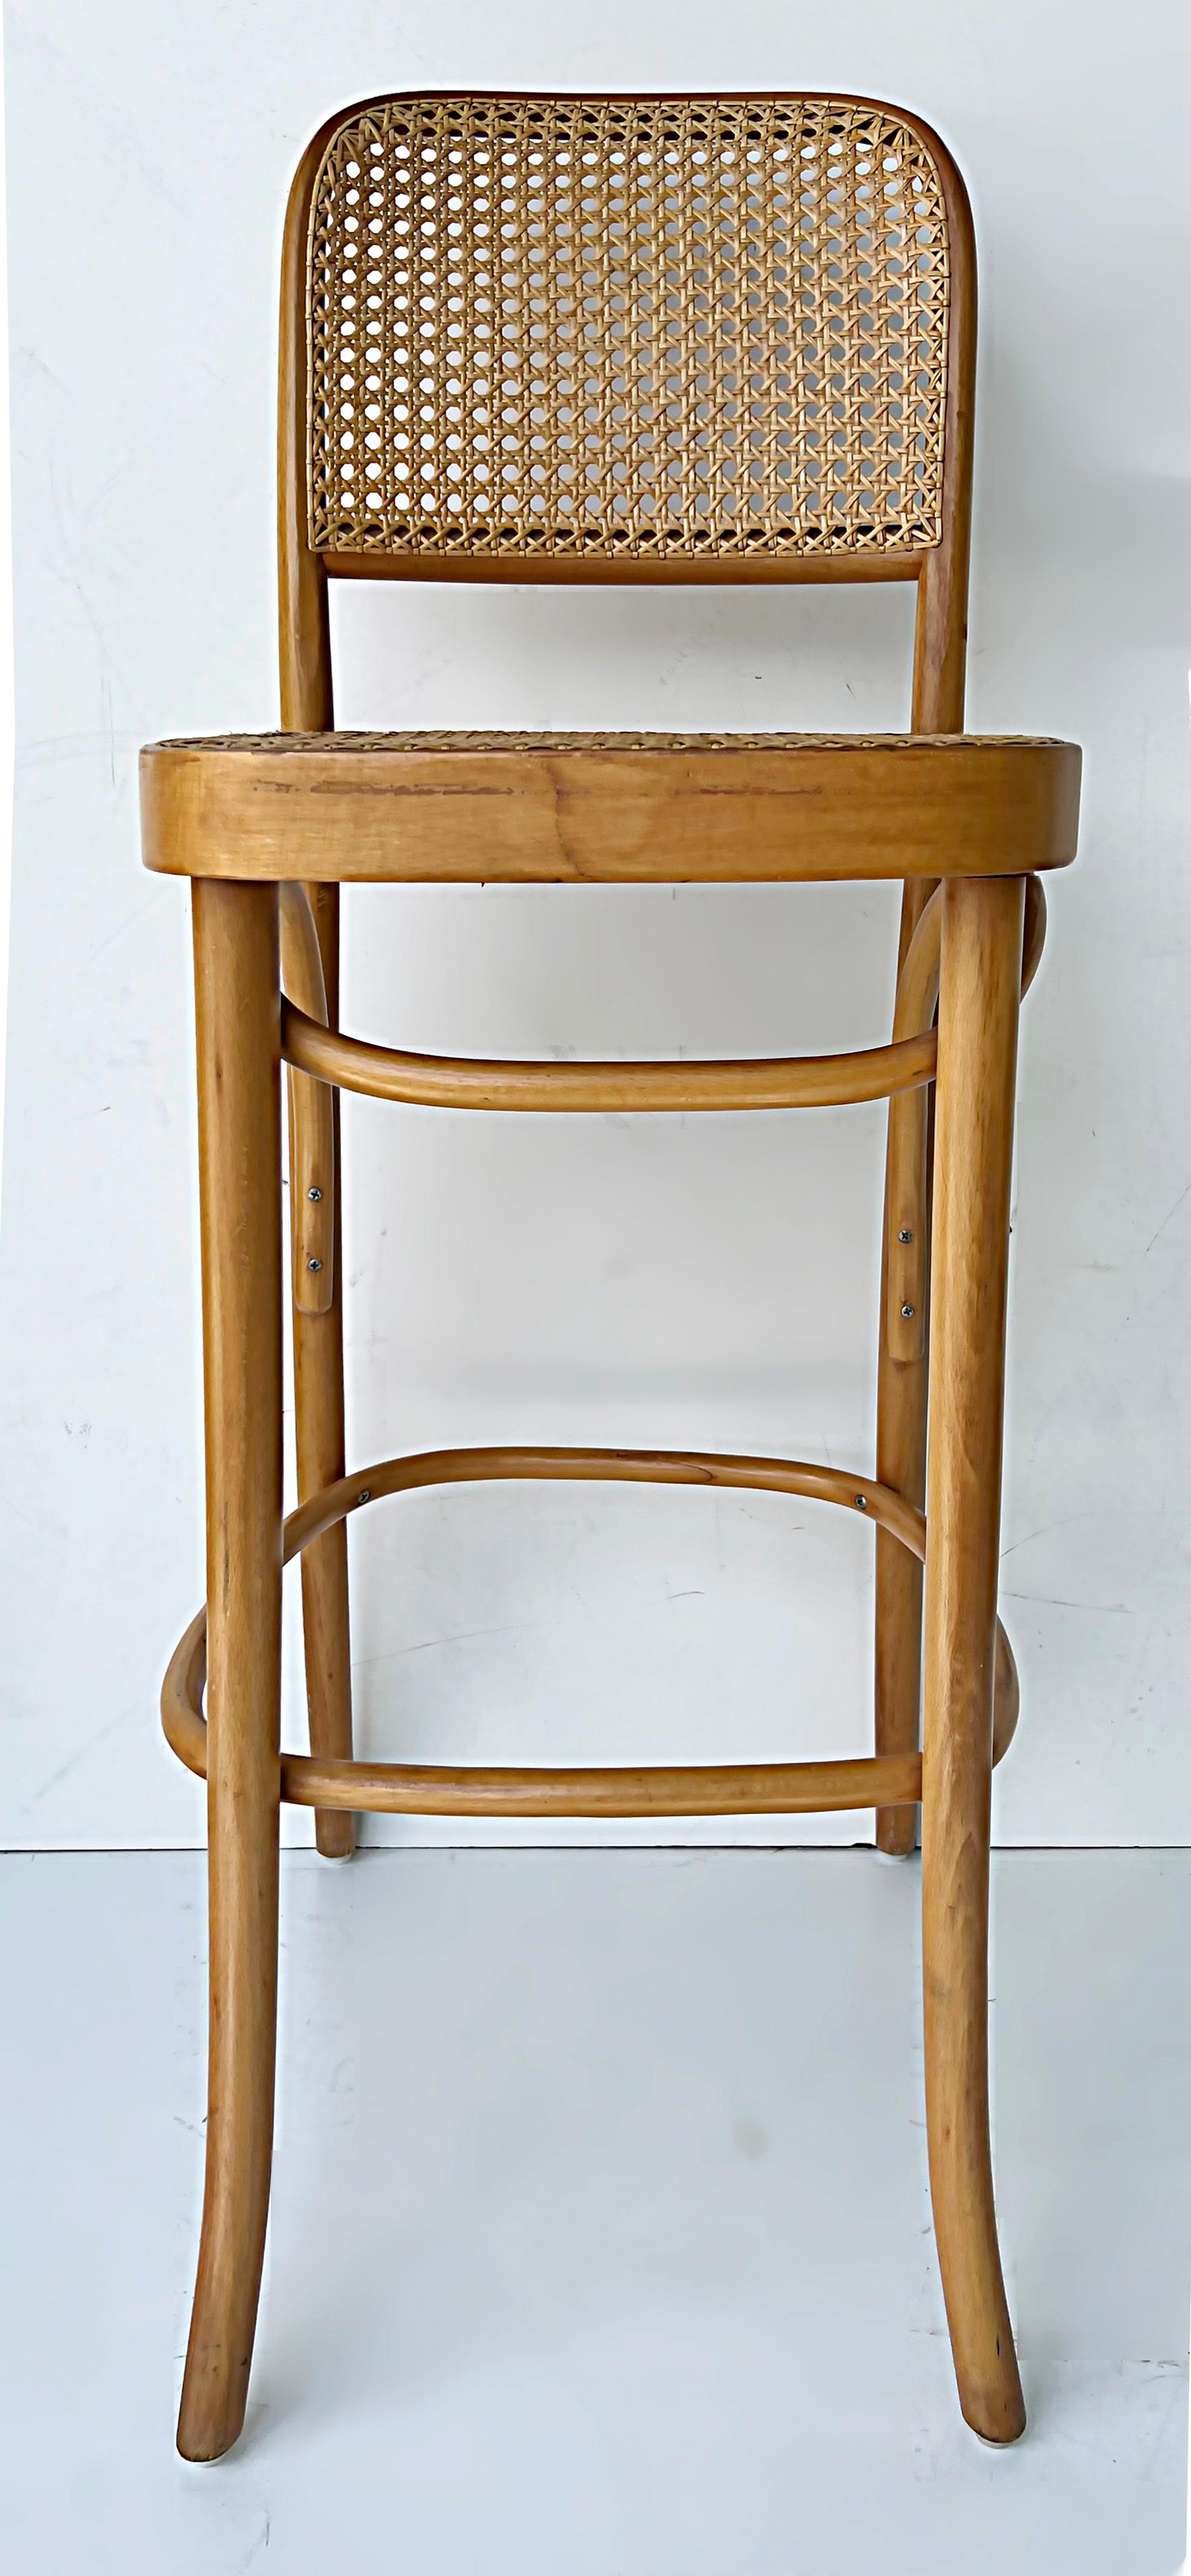 Vintage Hoffmann bentwood thonet bar stools, set of 3 

Offered for sale is a set of 3 vintage modern beech wood 811 Thonet bentwood bar stools by Josef Hoffmann with hand-caned seats and backs. Hoffman's original 811 chair design was from 1930